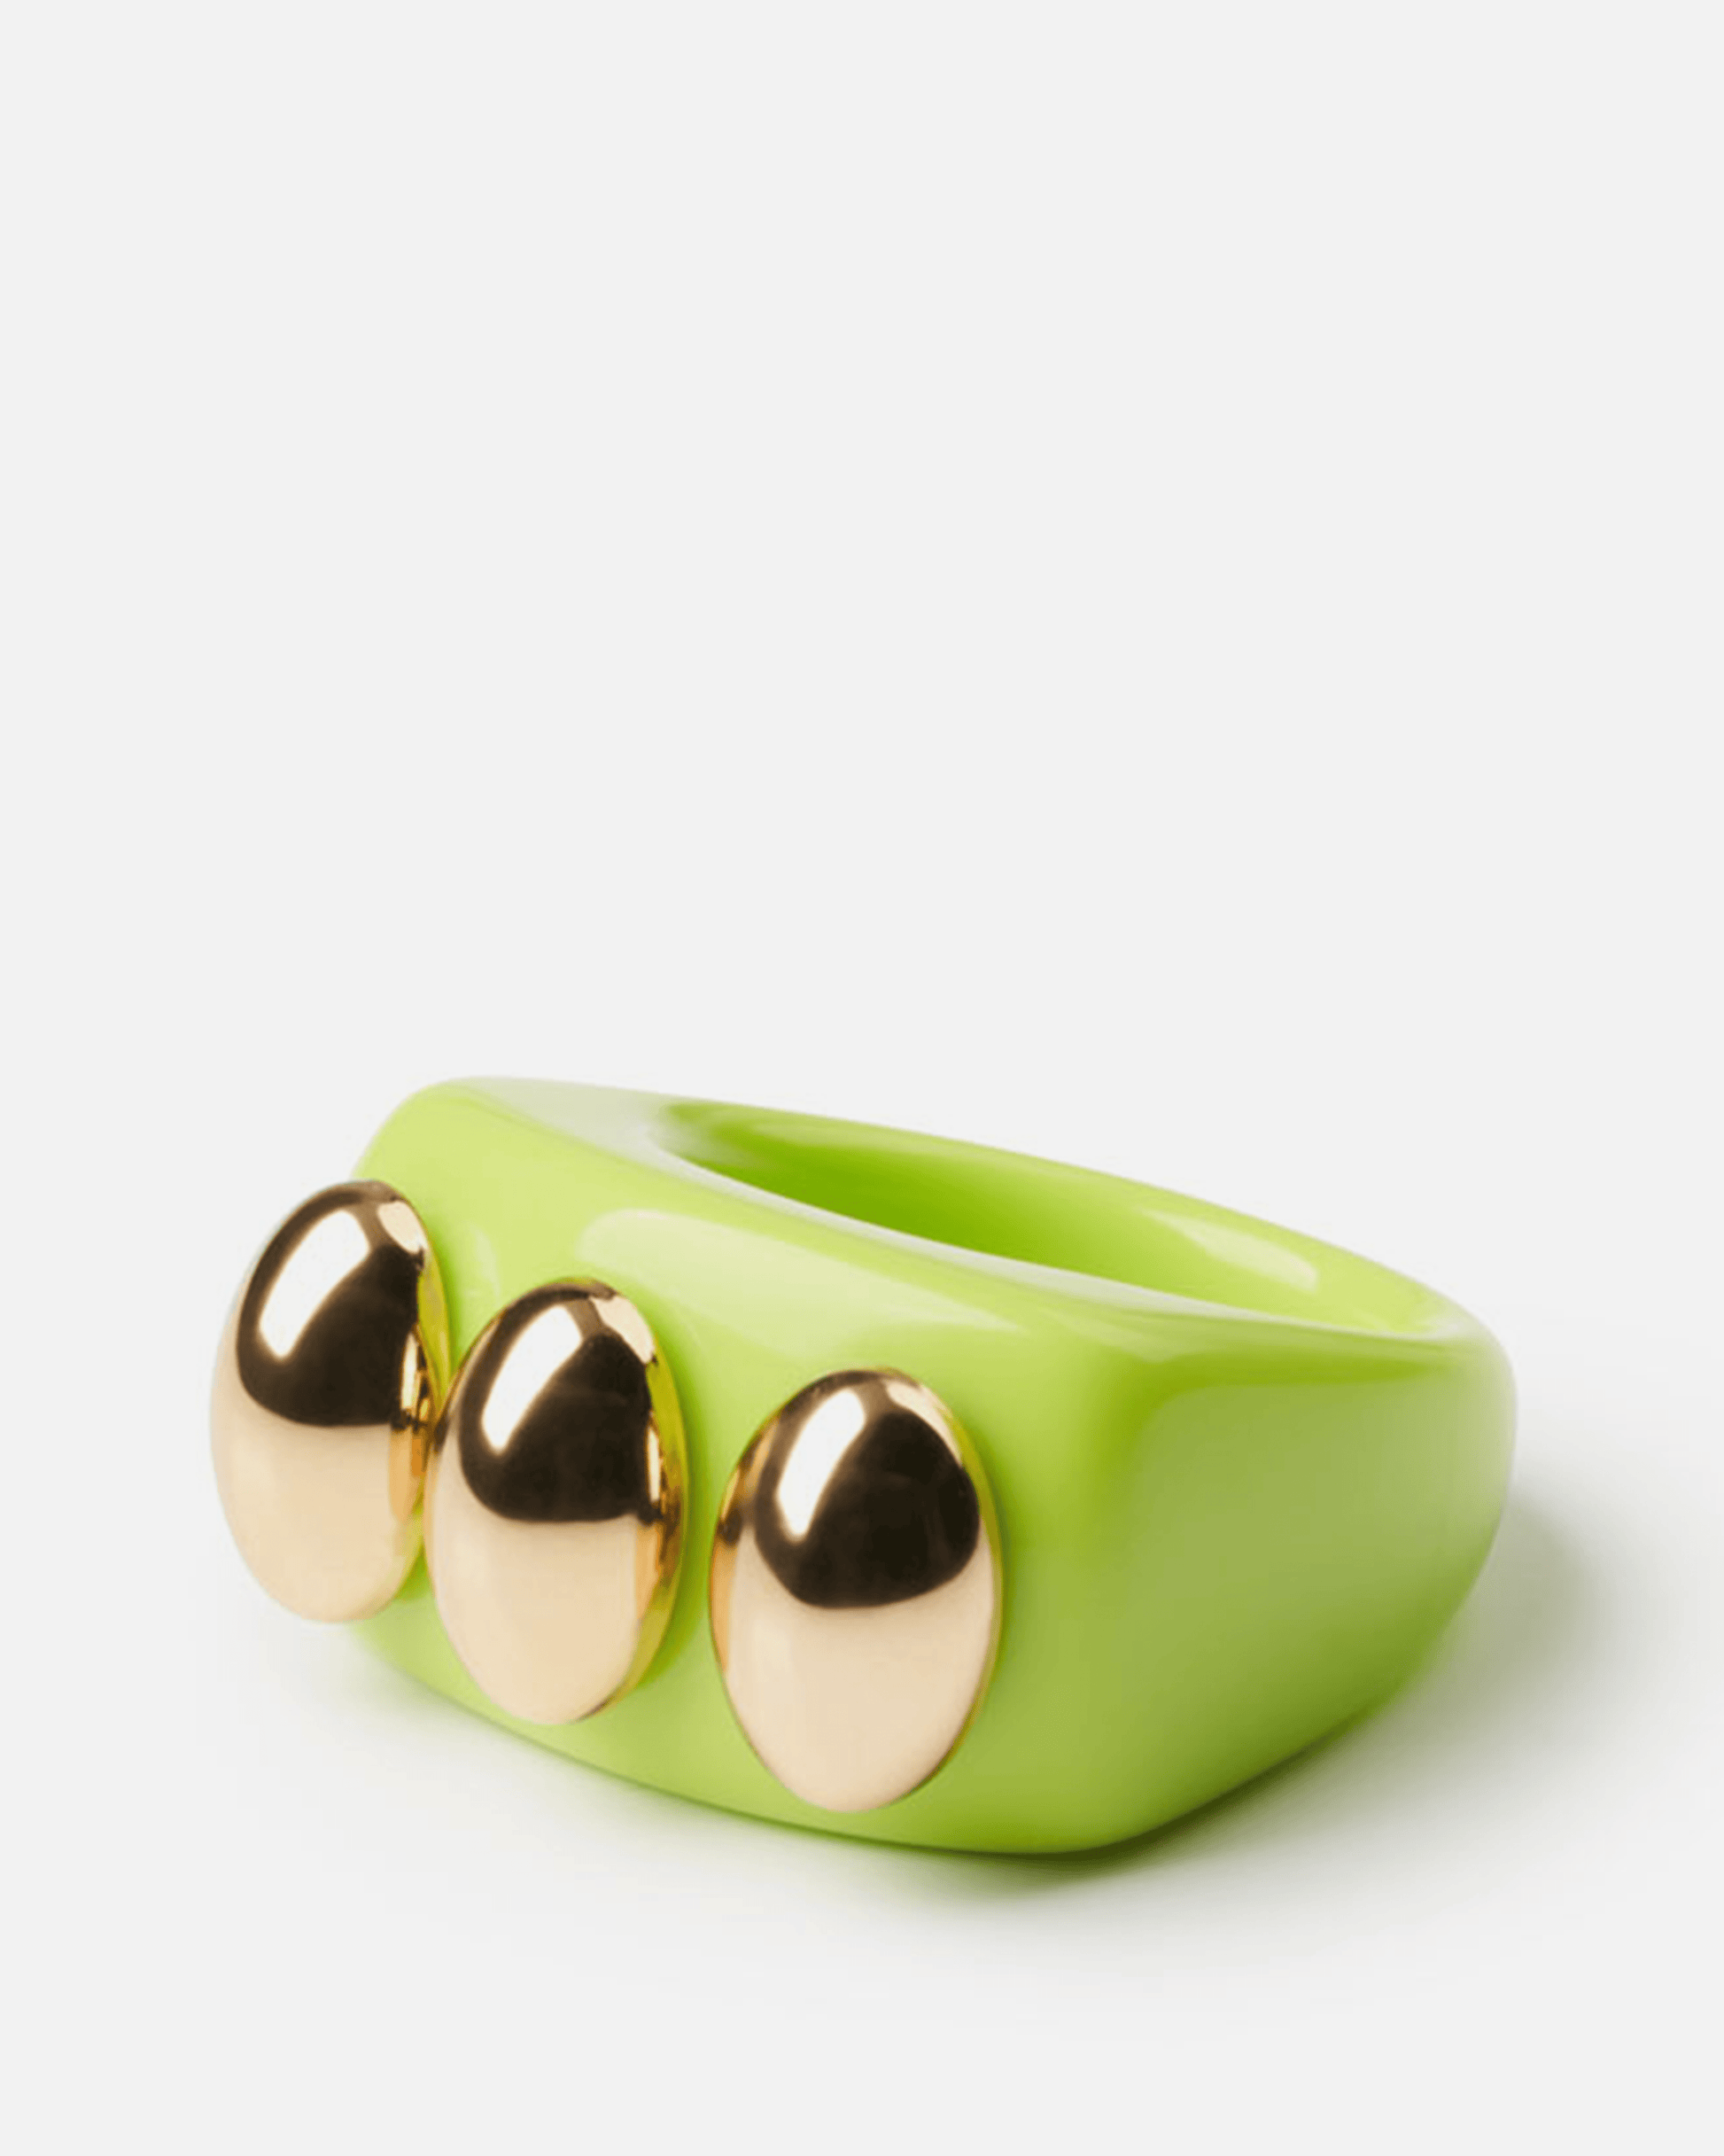 La Manso Jewelry Knuckle Duster Ring in Lime